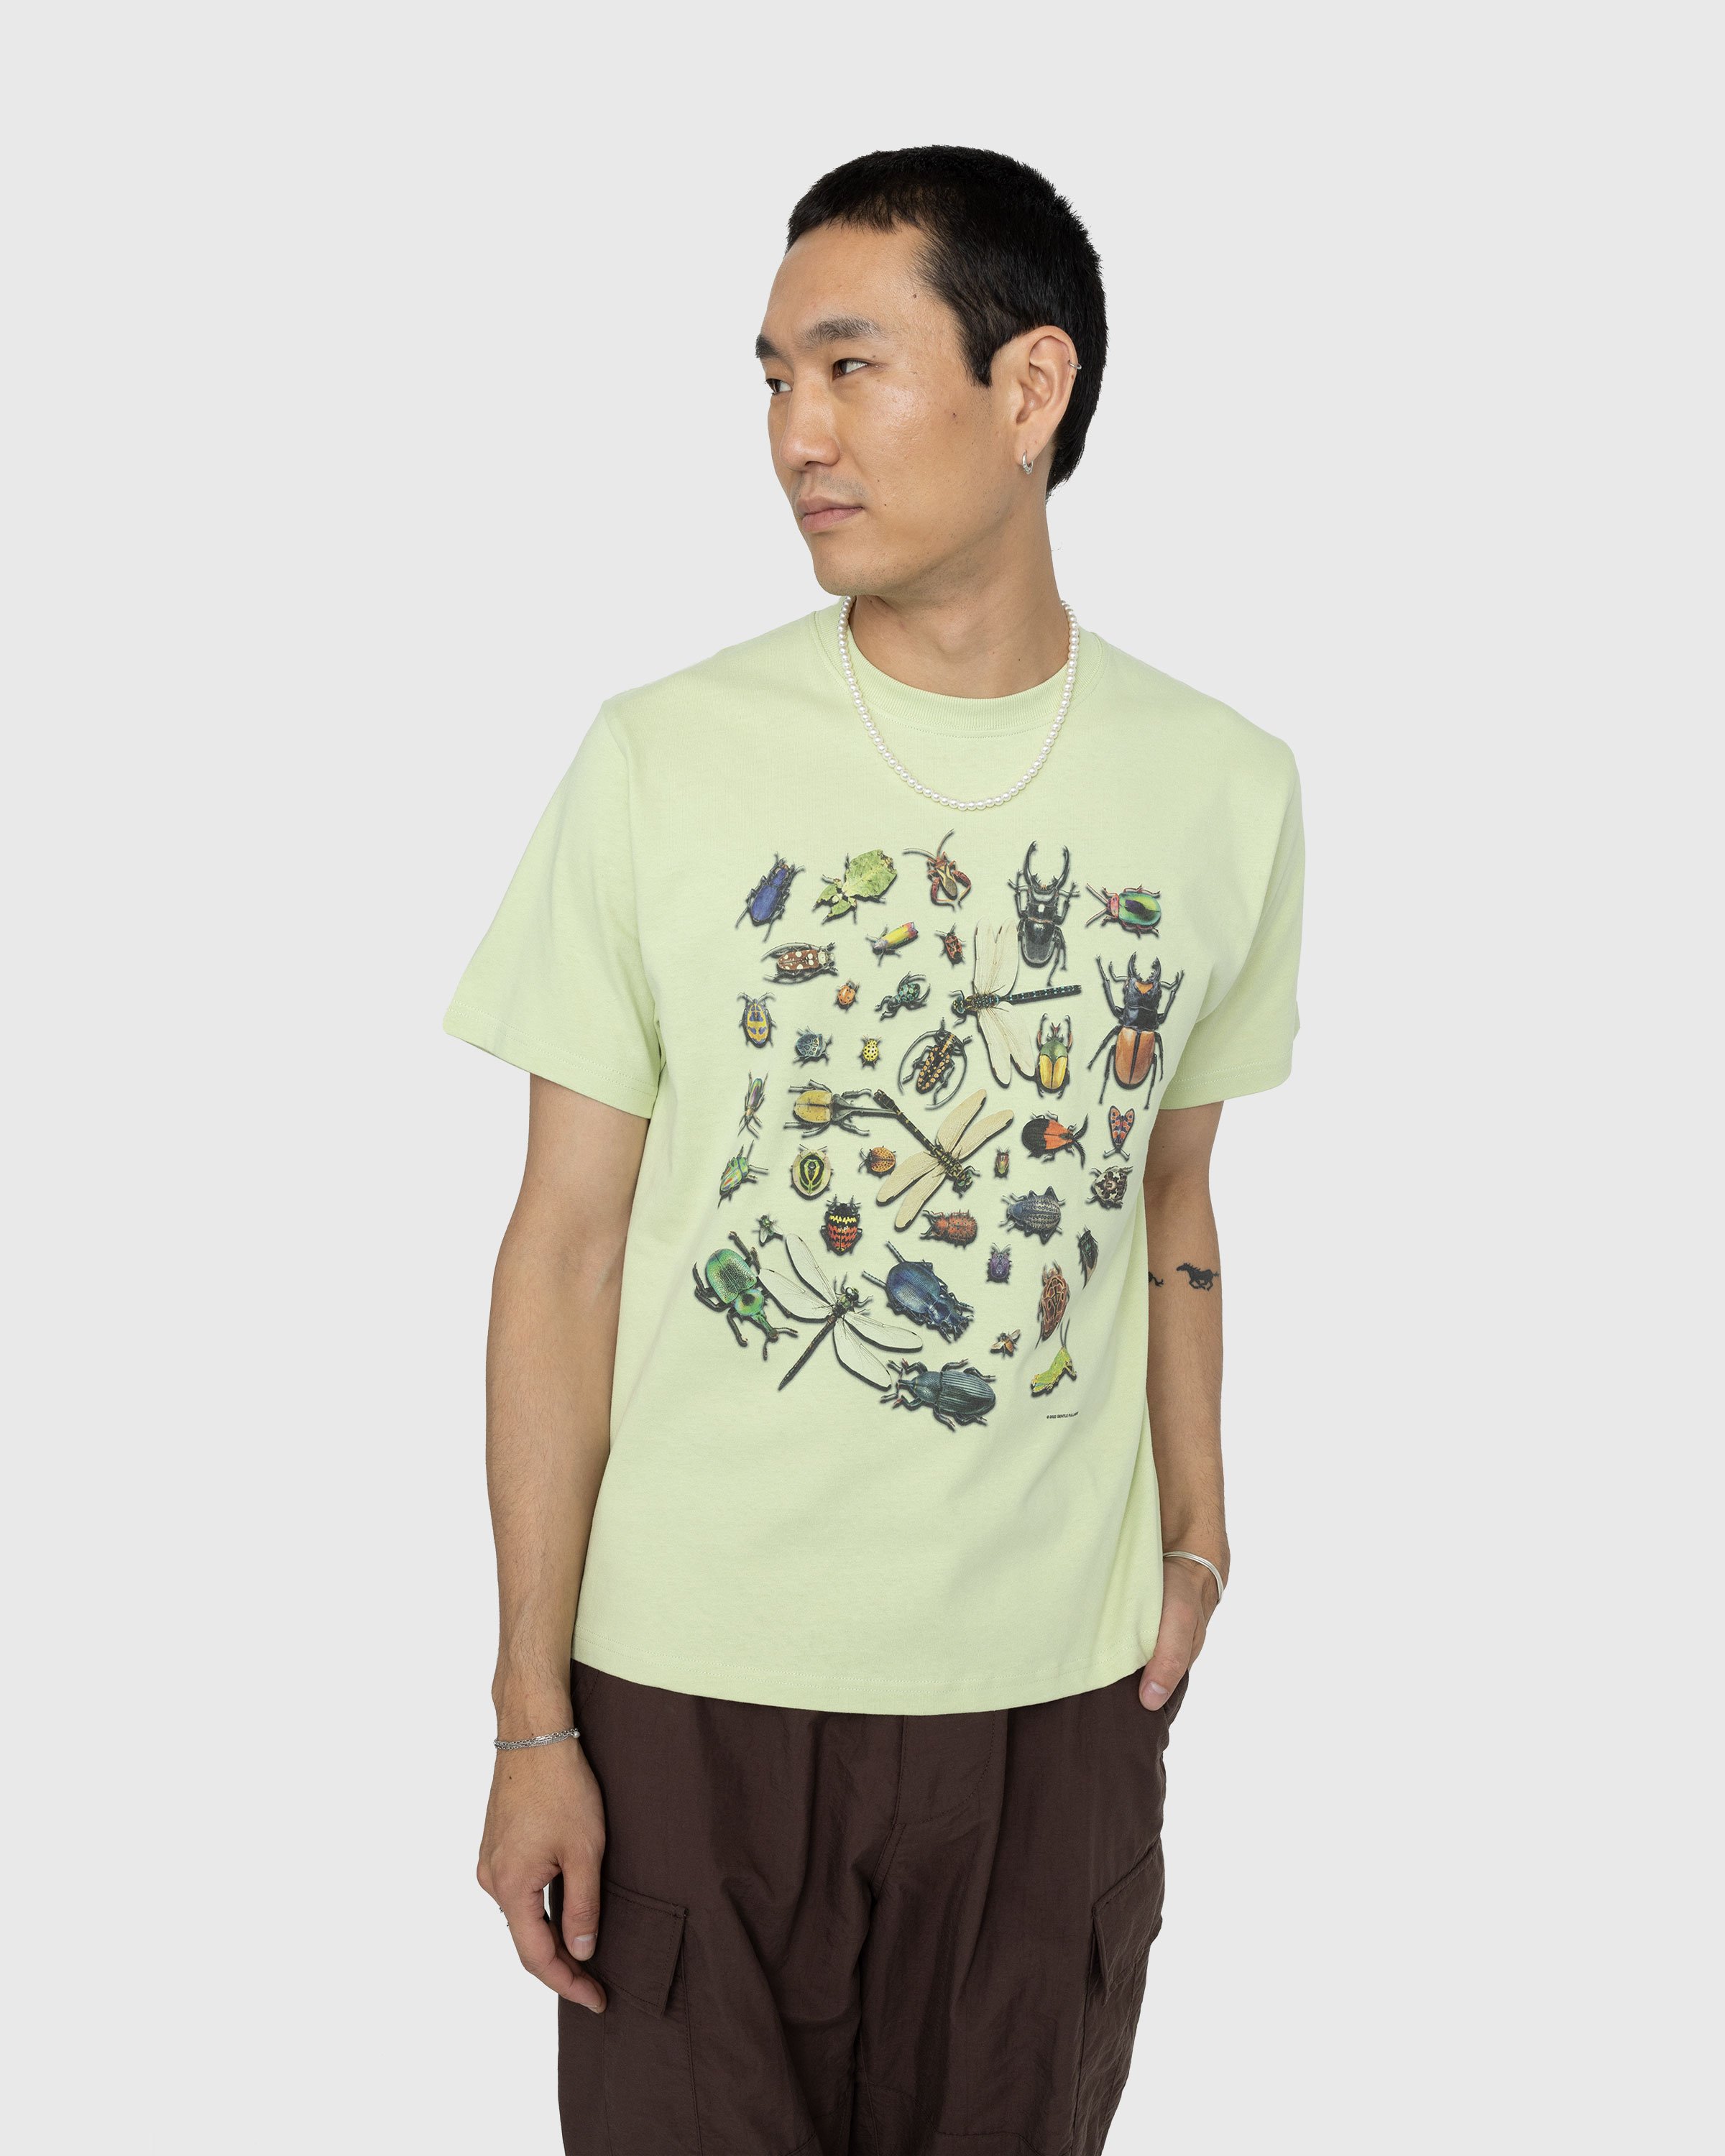 Gentle Fullness - Recycled Cotton Bugs Tee Green - Clothing - Green - Image 2